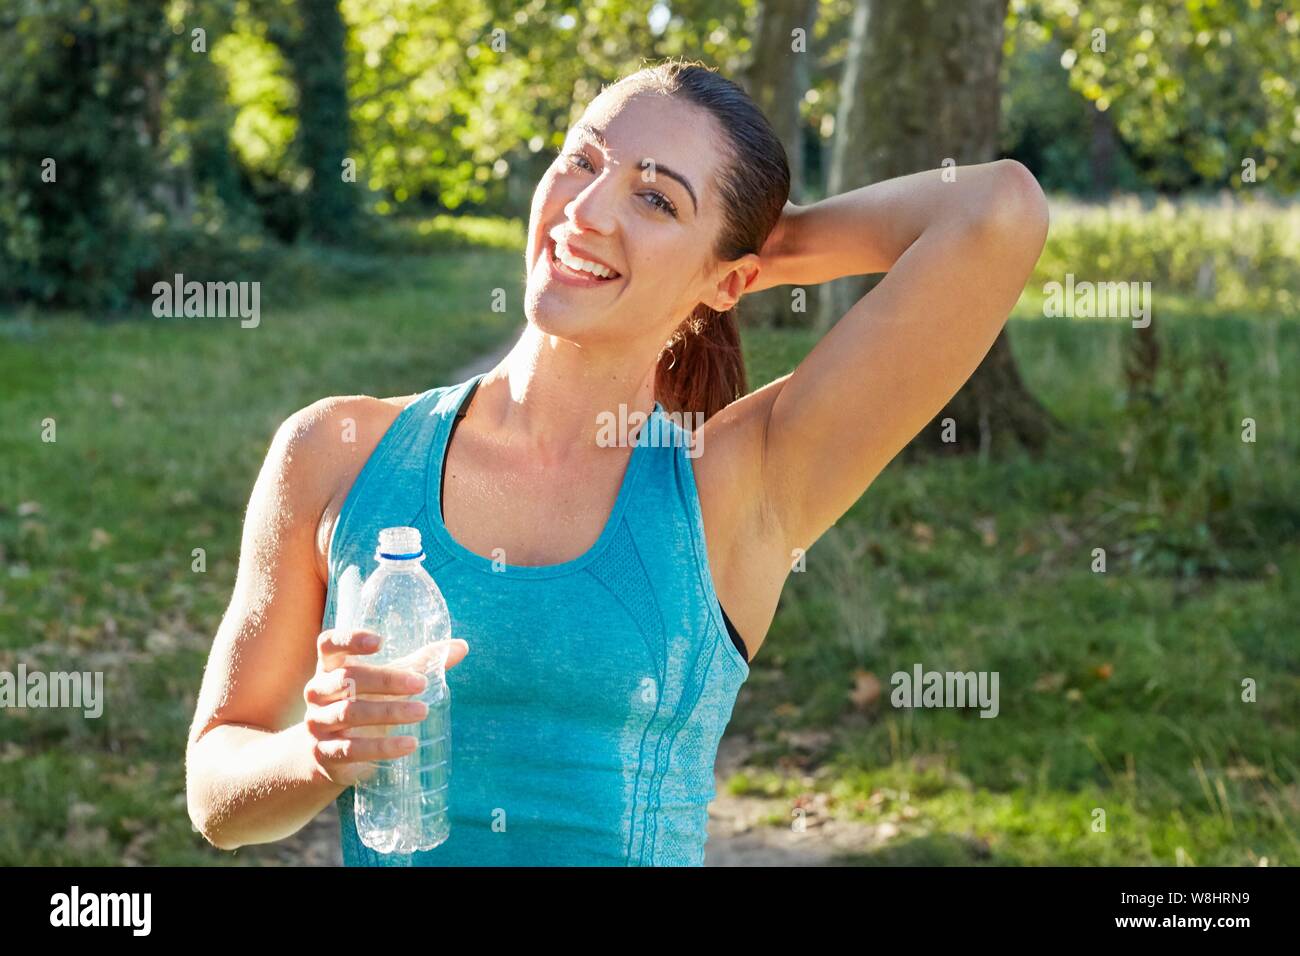 Young woman holding water bottle smiling, portrait. Stock Photo